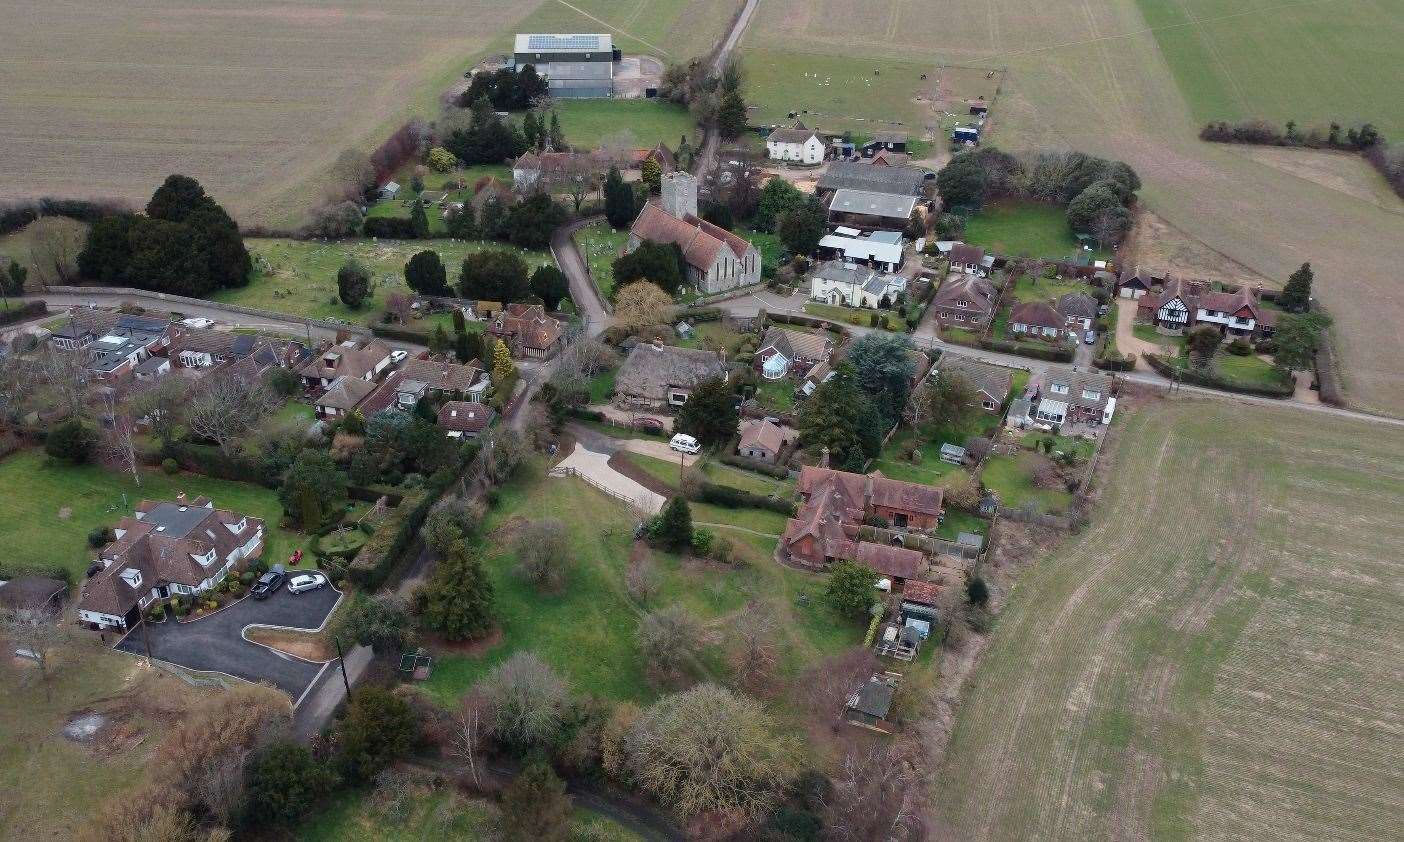 One of Daniel's reference drone photos for his map of Nonington